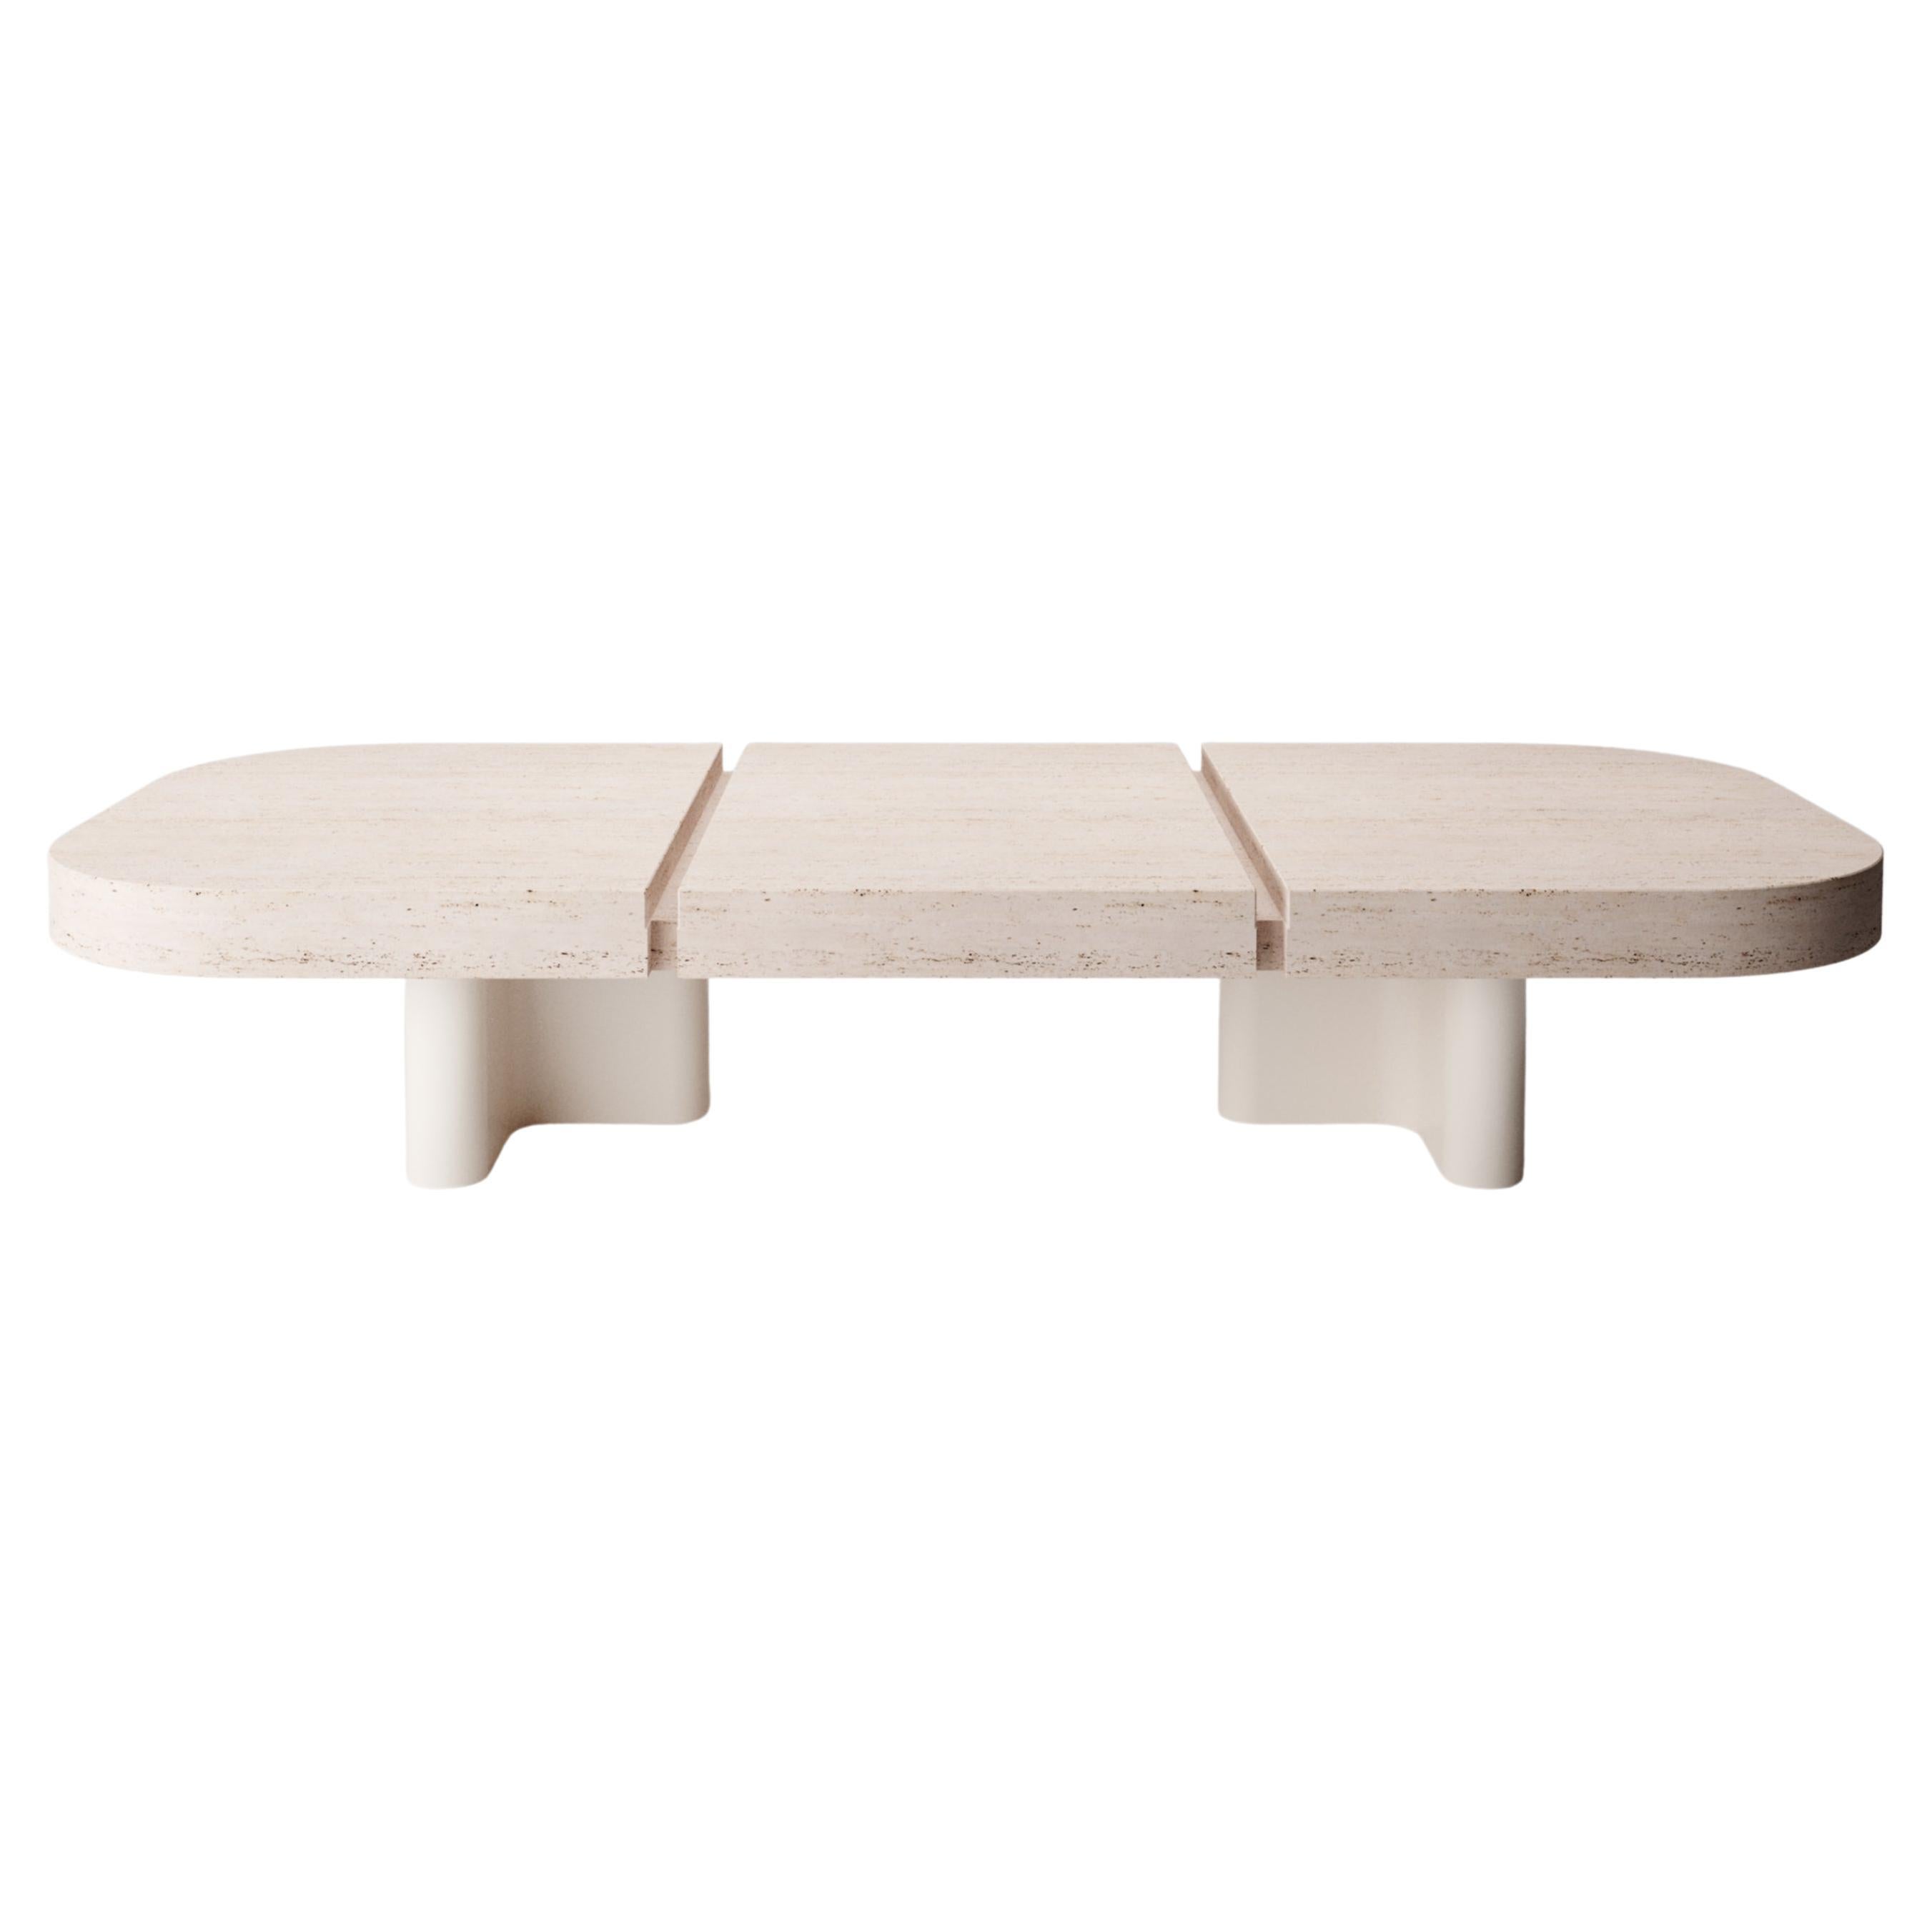 Collector -Designed by Studio Rig Meco Center Table Lackiert und Travertino im Angebot